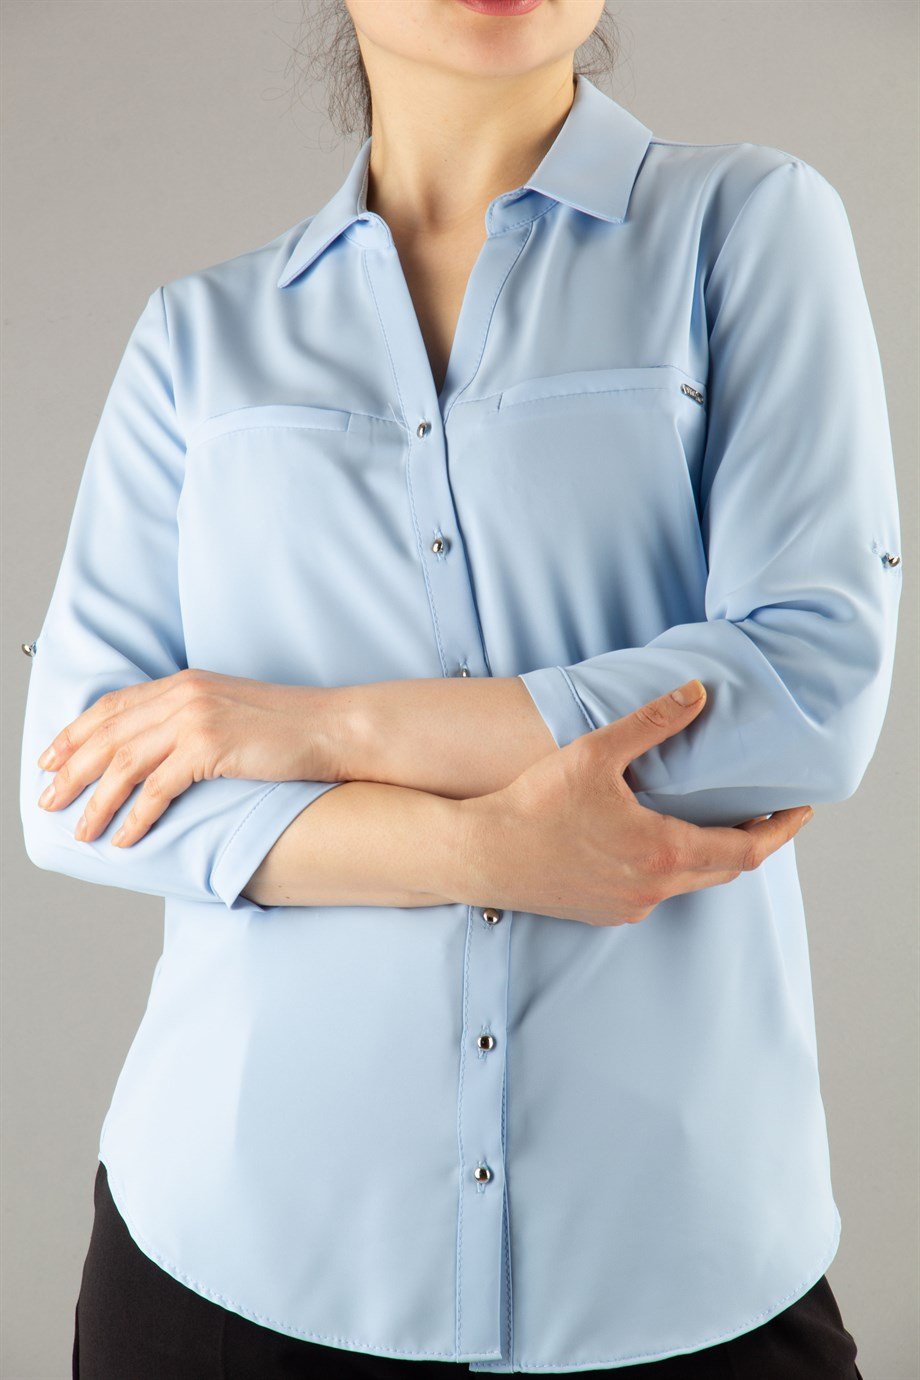 Classic Office Big Size Shirt - Baby Blue - Wholesale Womens Clothing  Vendors For Boutiques